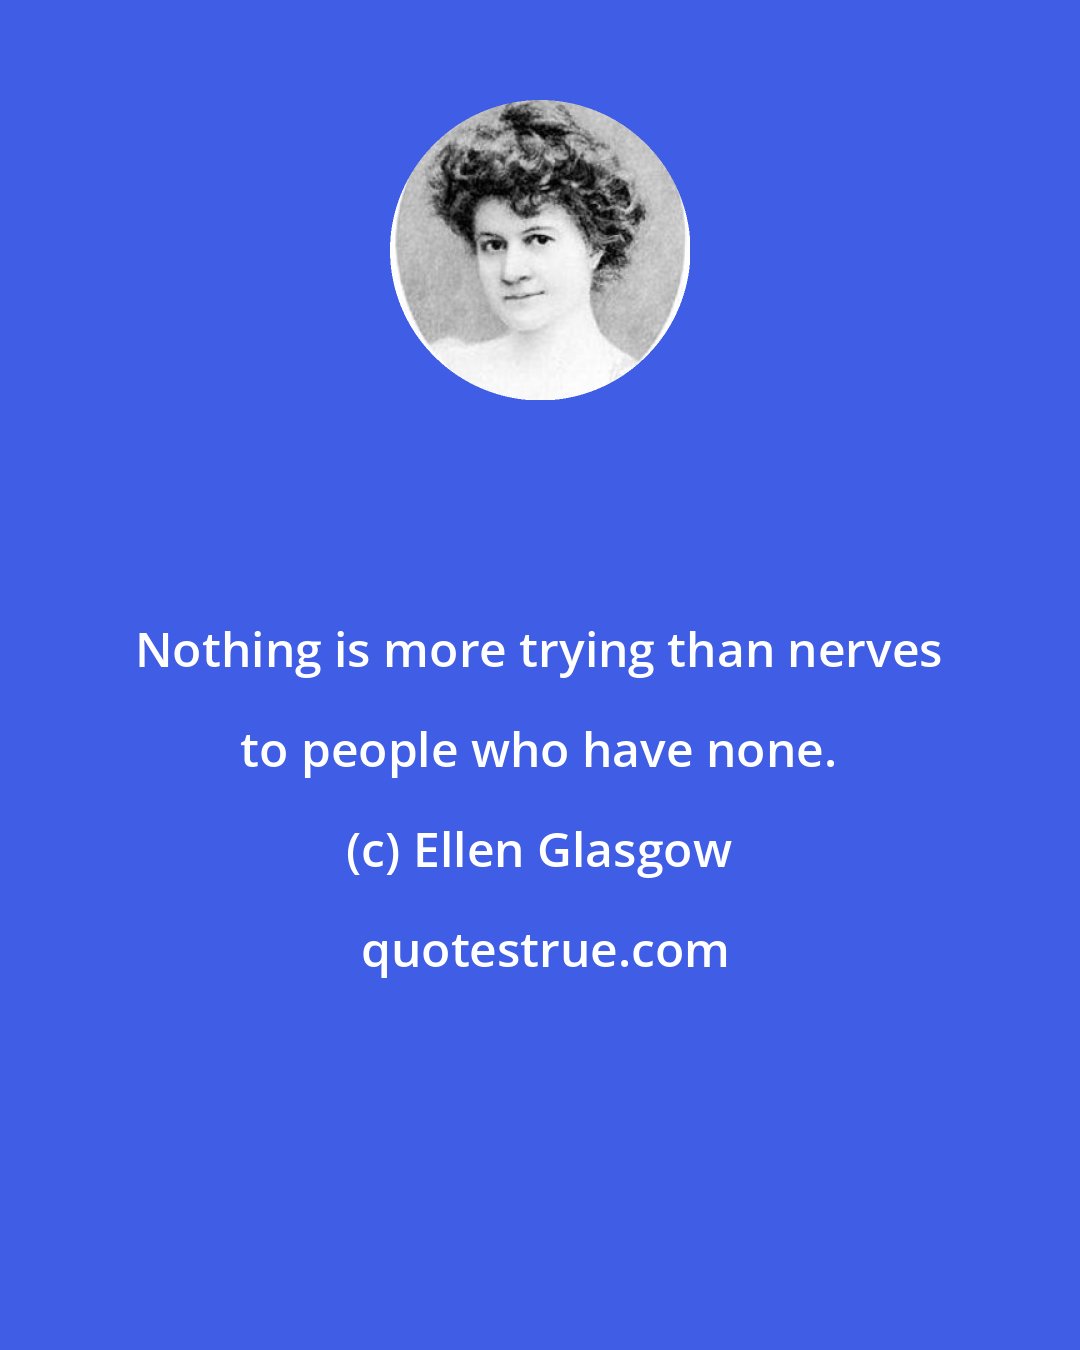 Ellen Glasgow: Nothing is more trying than nerves to people who have none.